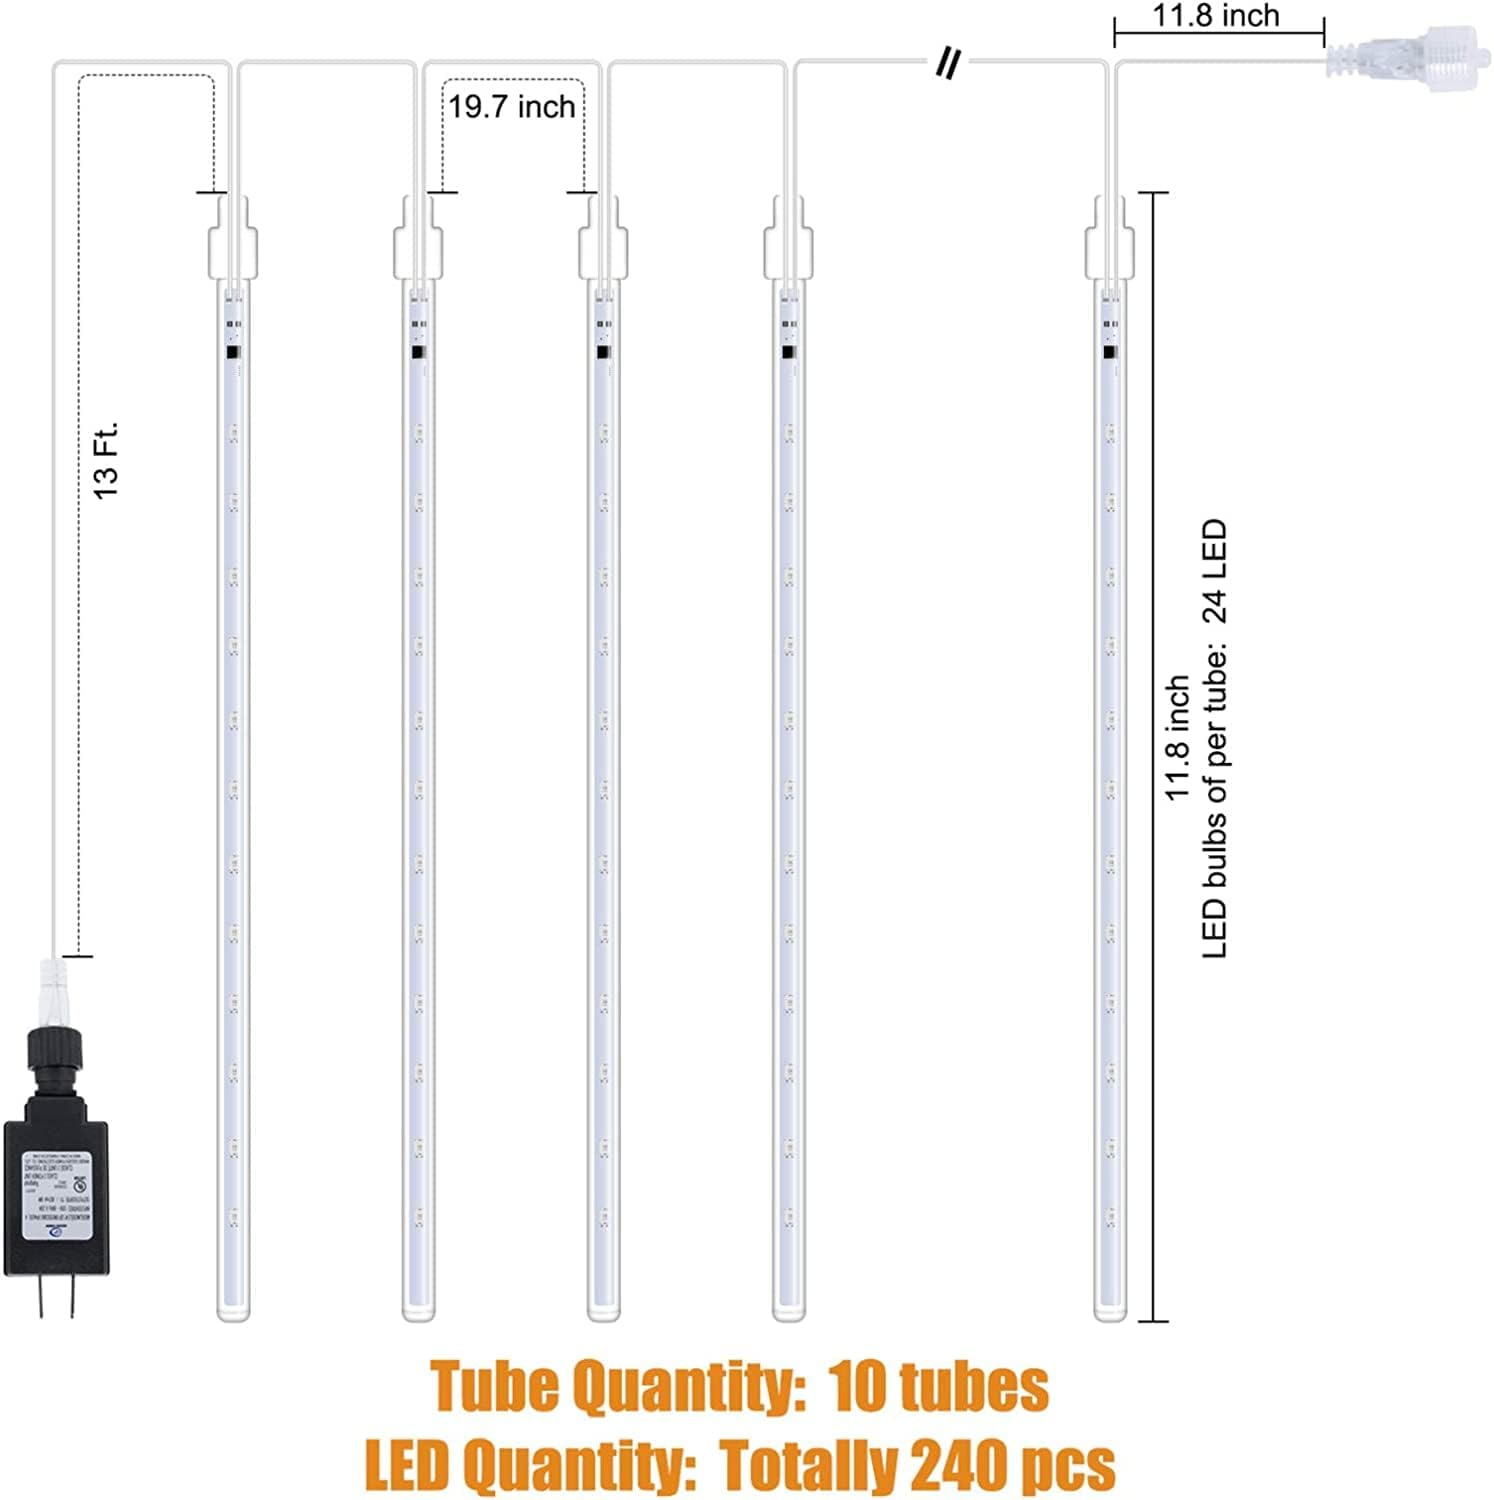 2 x 11.8 Inches / 10 Tubes / 240 LED / Pure White